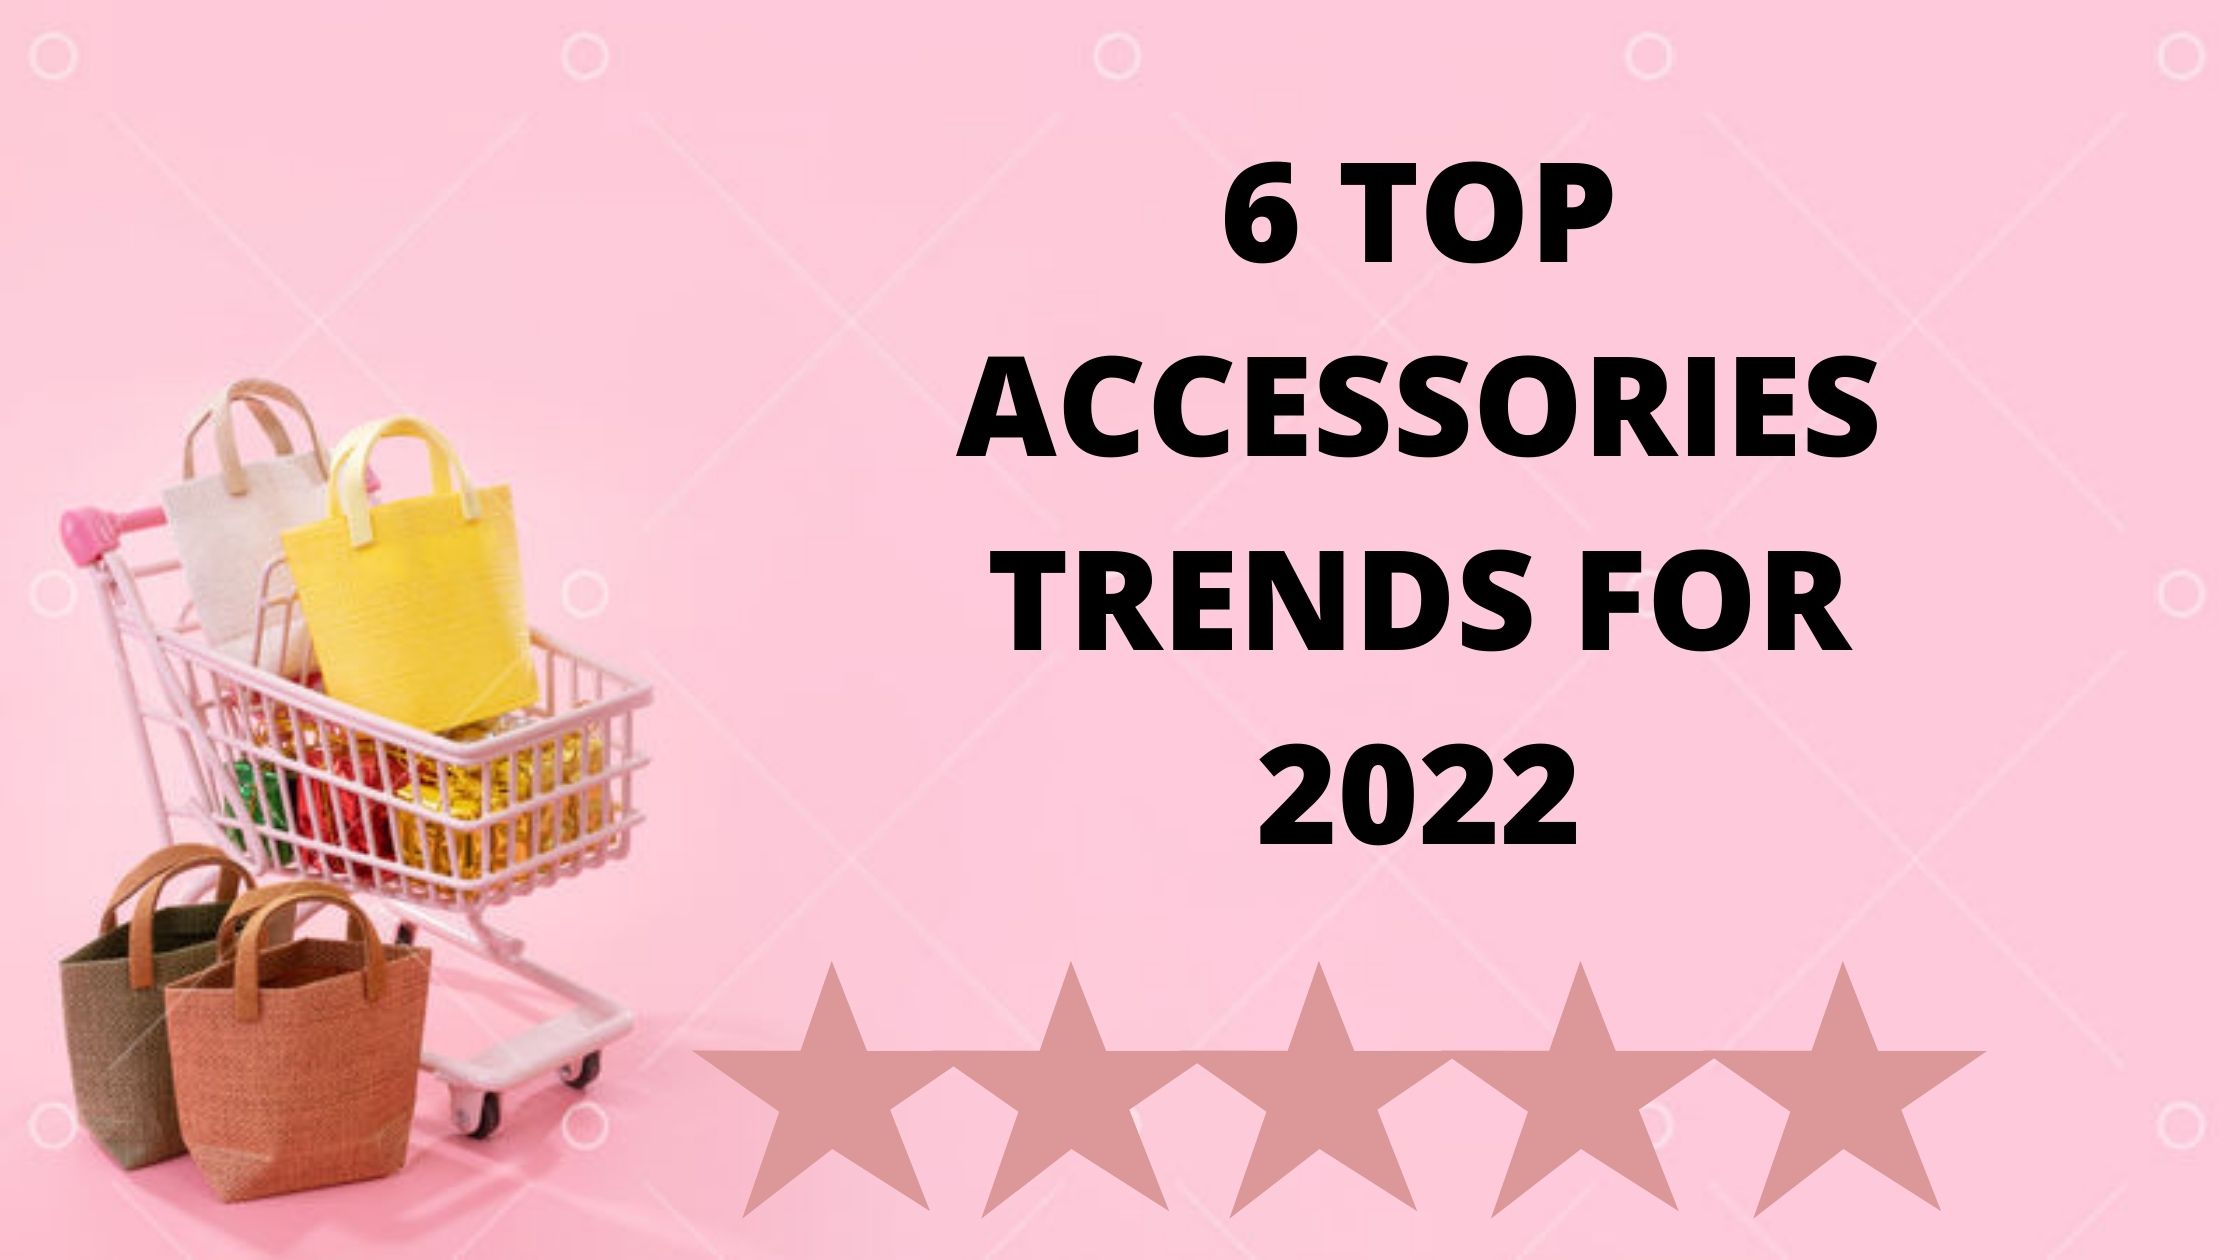 You are currently viewing 6 TOP ACCESSORIES TRENDS FOR 2022